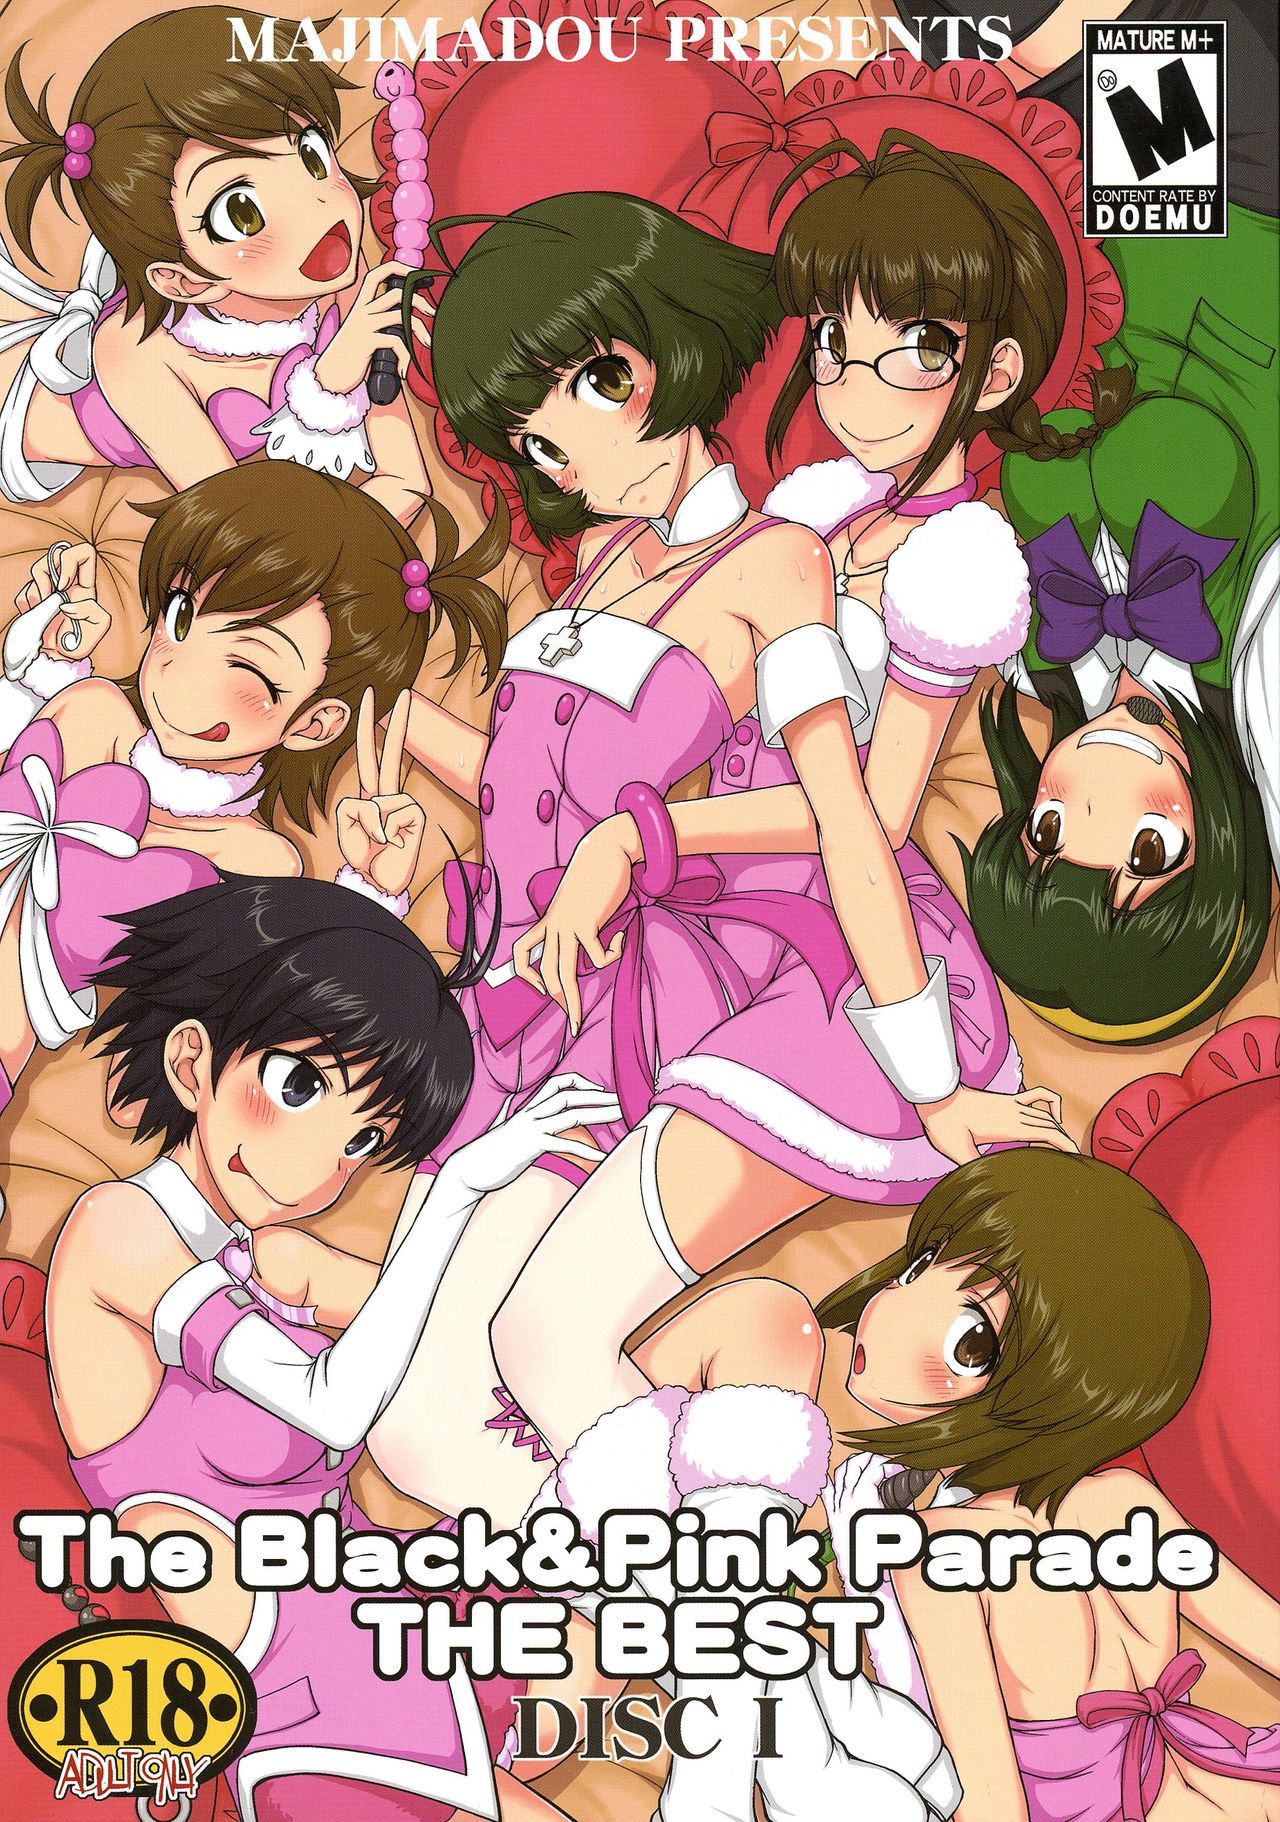 (C86) [Majimadou (Matou)] The Black&Pink Parade THE BEST Disk1 (THE iDOLM@STER) (C86) [眞嶋堂 (まとう)] The Black&Pink Parade THE BEST Disk1 (アイドルマスター)